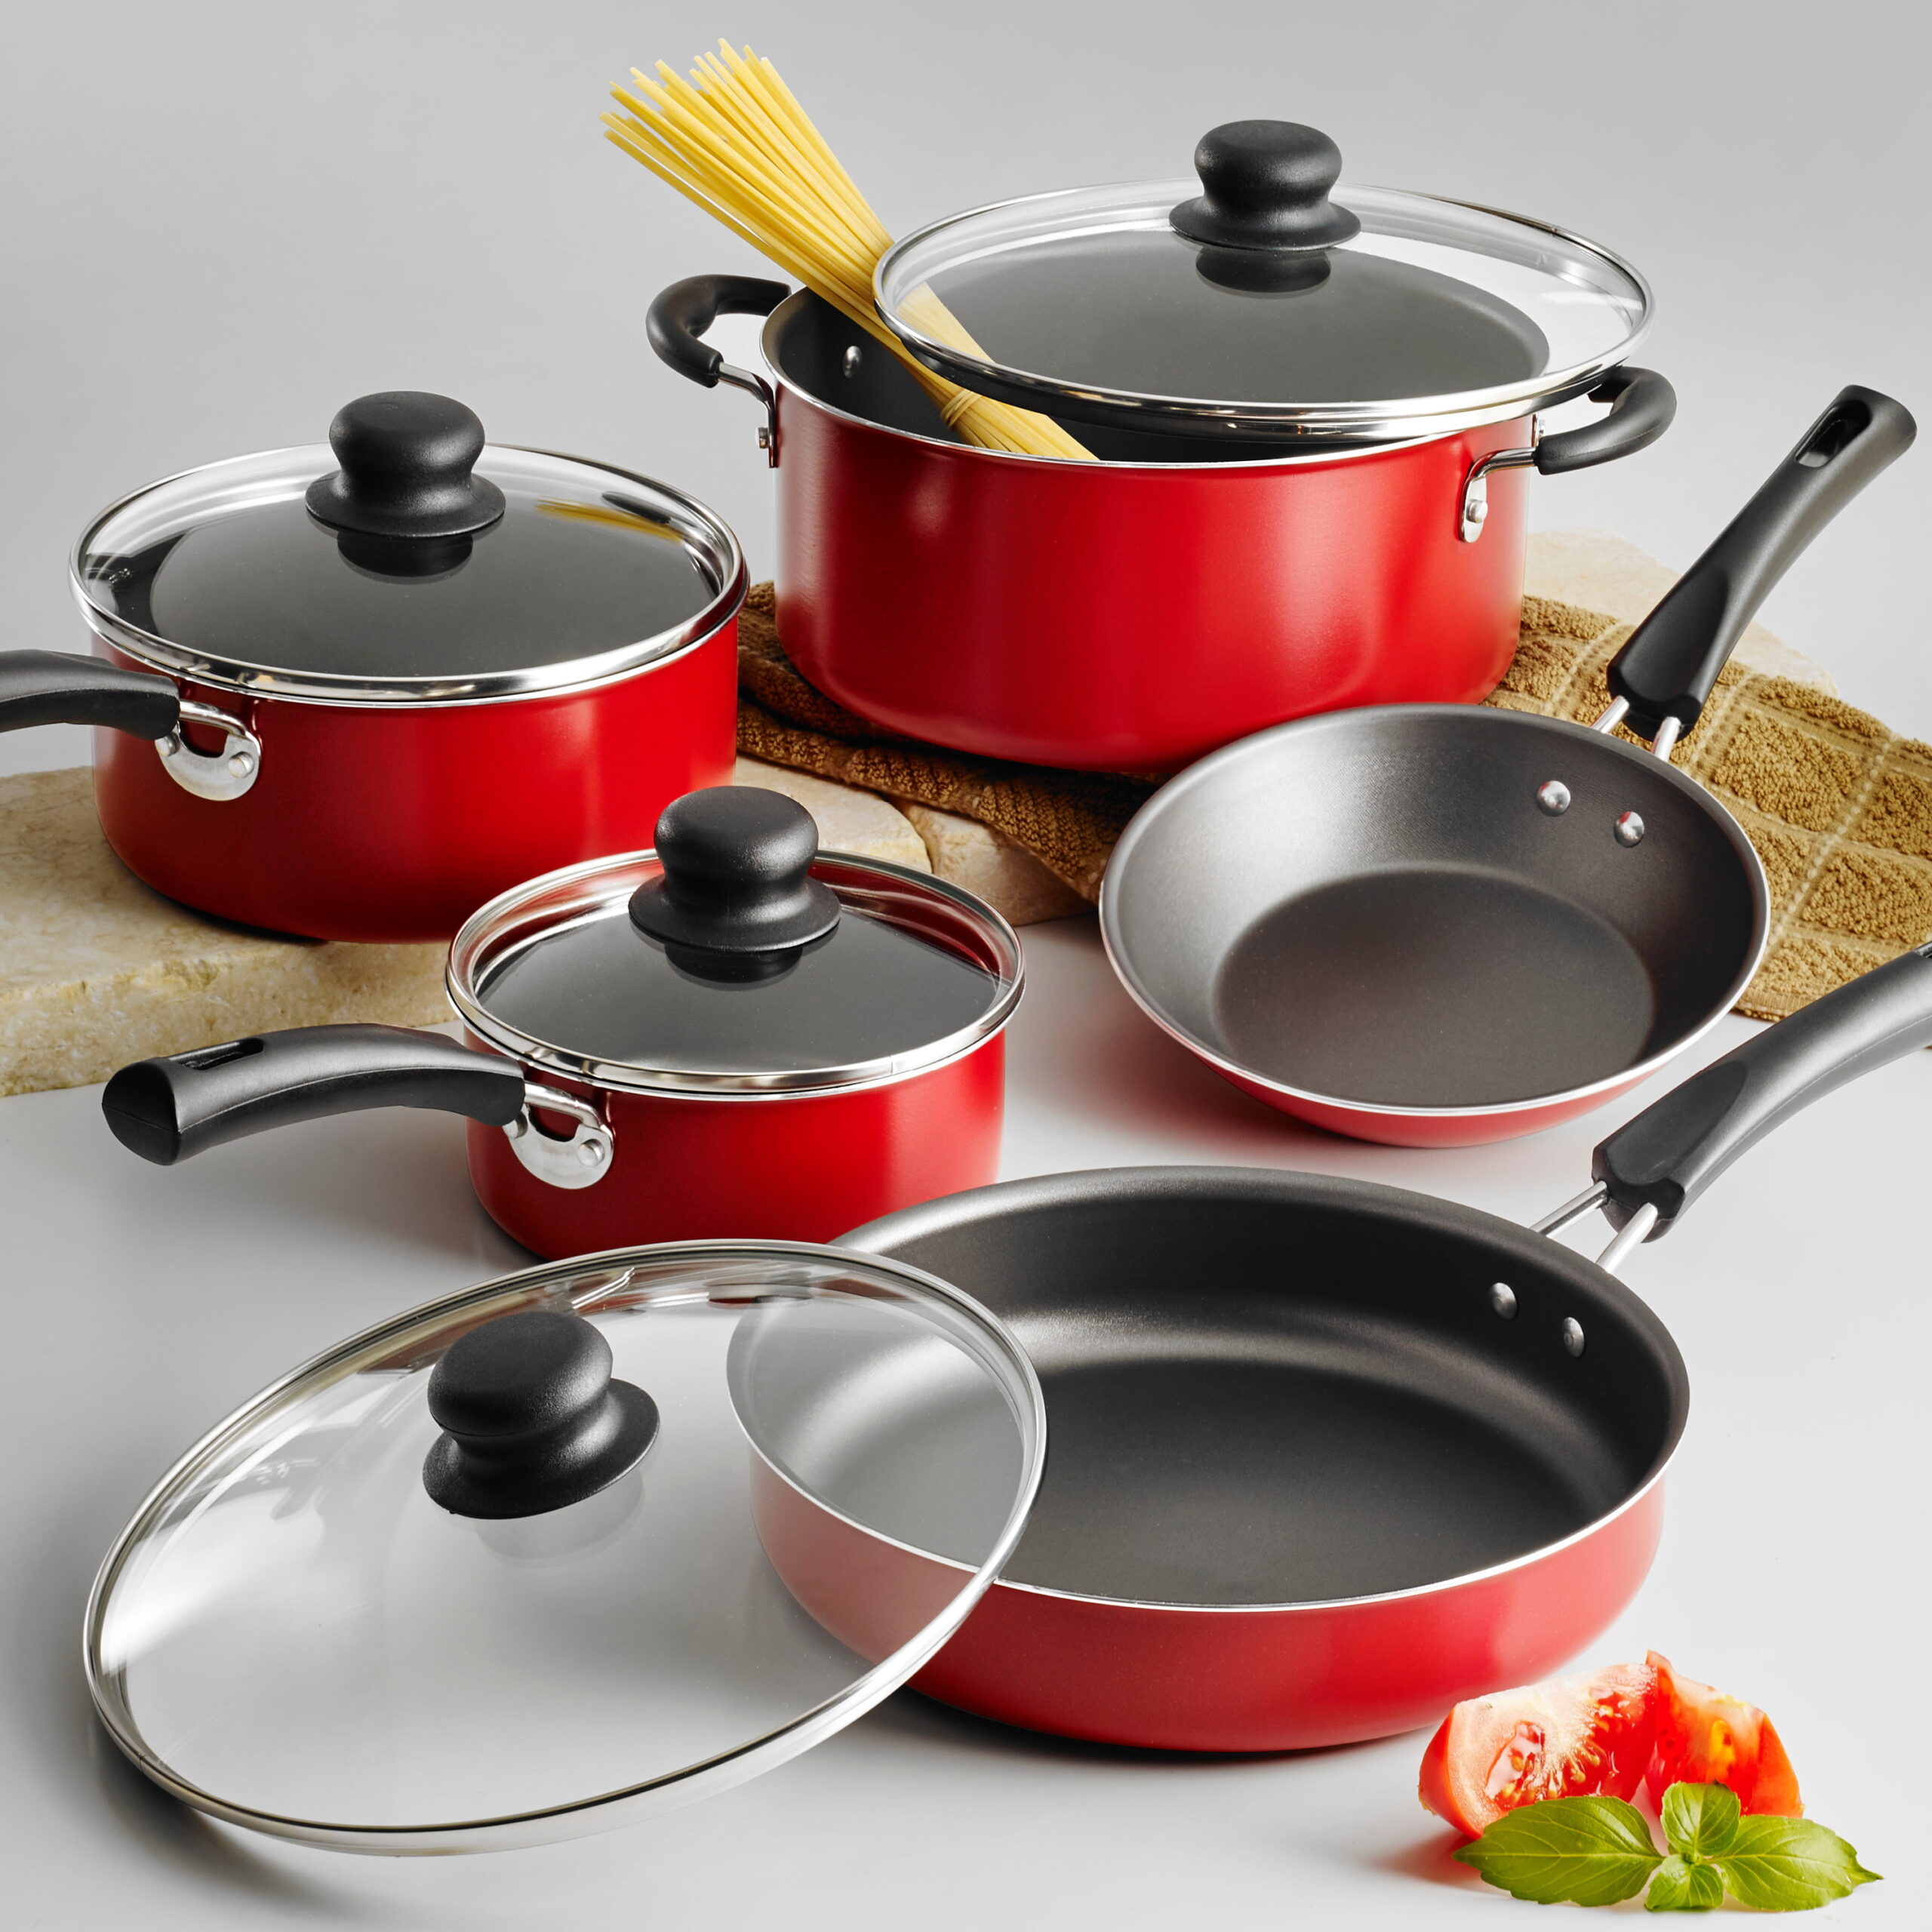  Tramontina PrimaWare 10-Piece Nonstick Cookware Set, Steel Gray  by Tramontina: Home & Kitchen